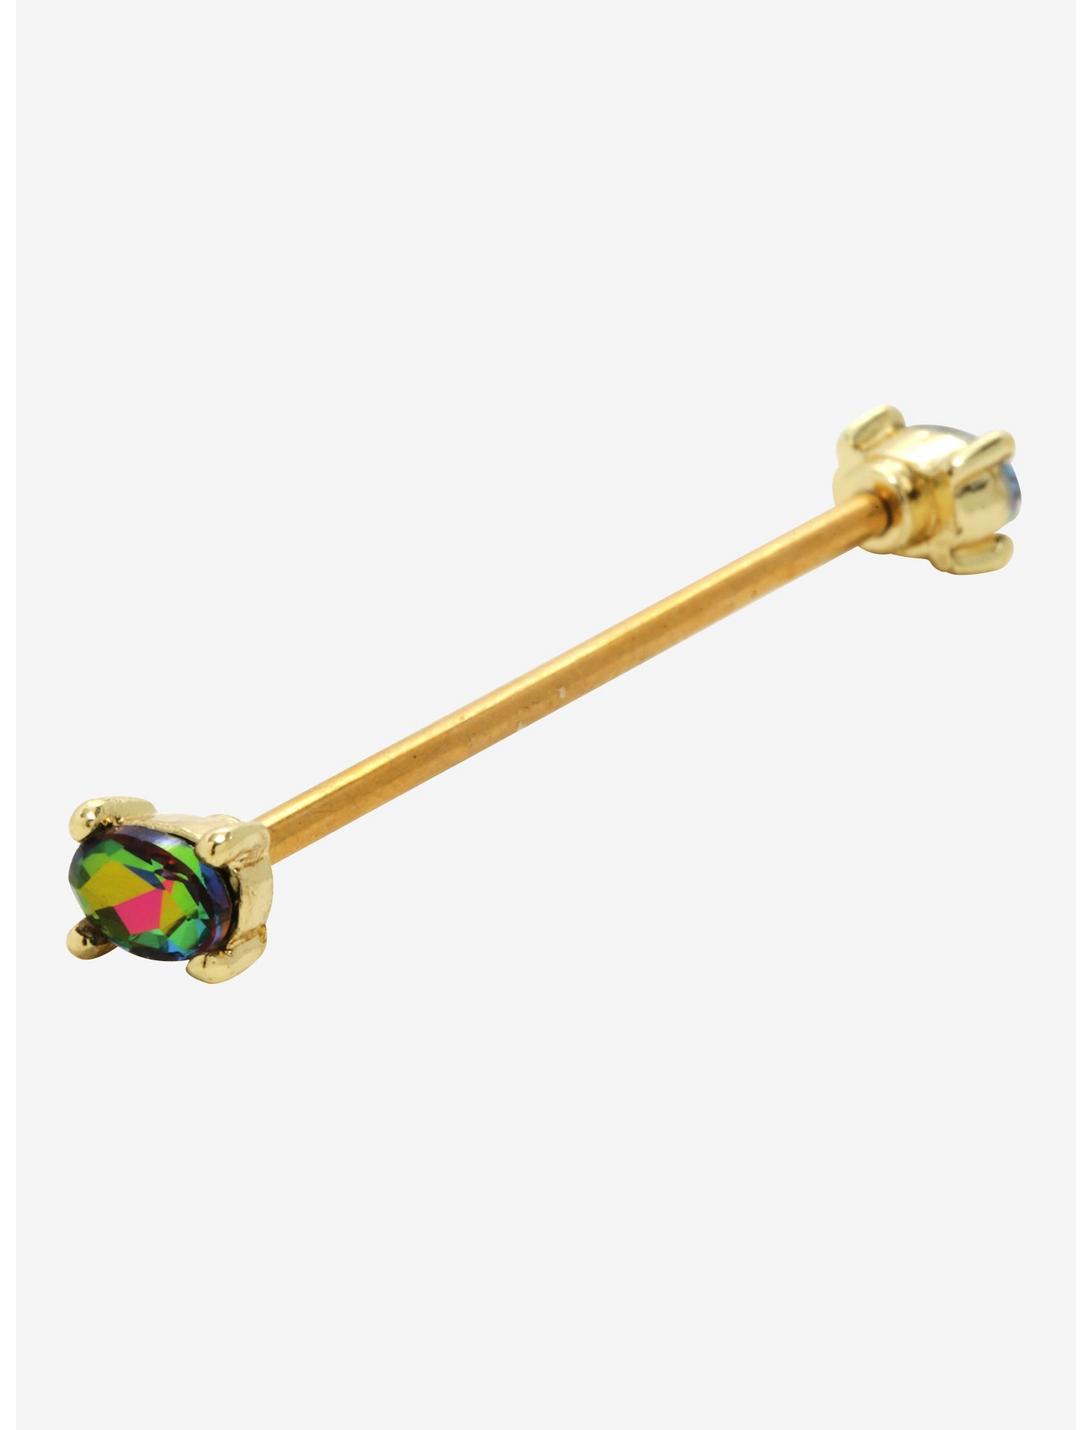 14G 1 1/2 Steel Gold Abs Industrial Barbell, , hi-res